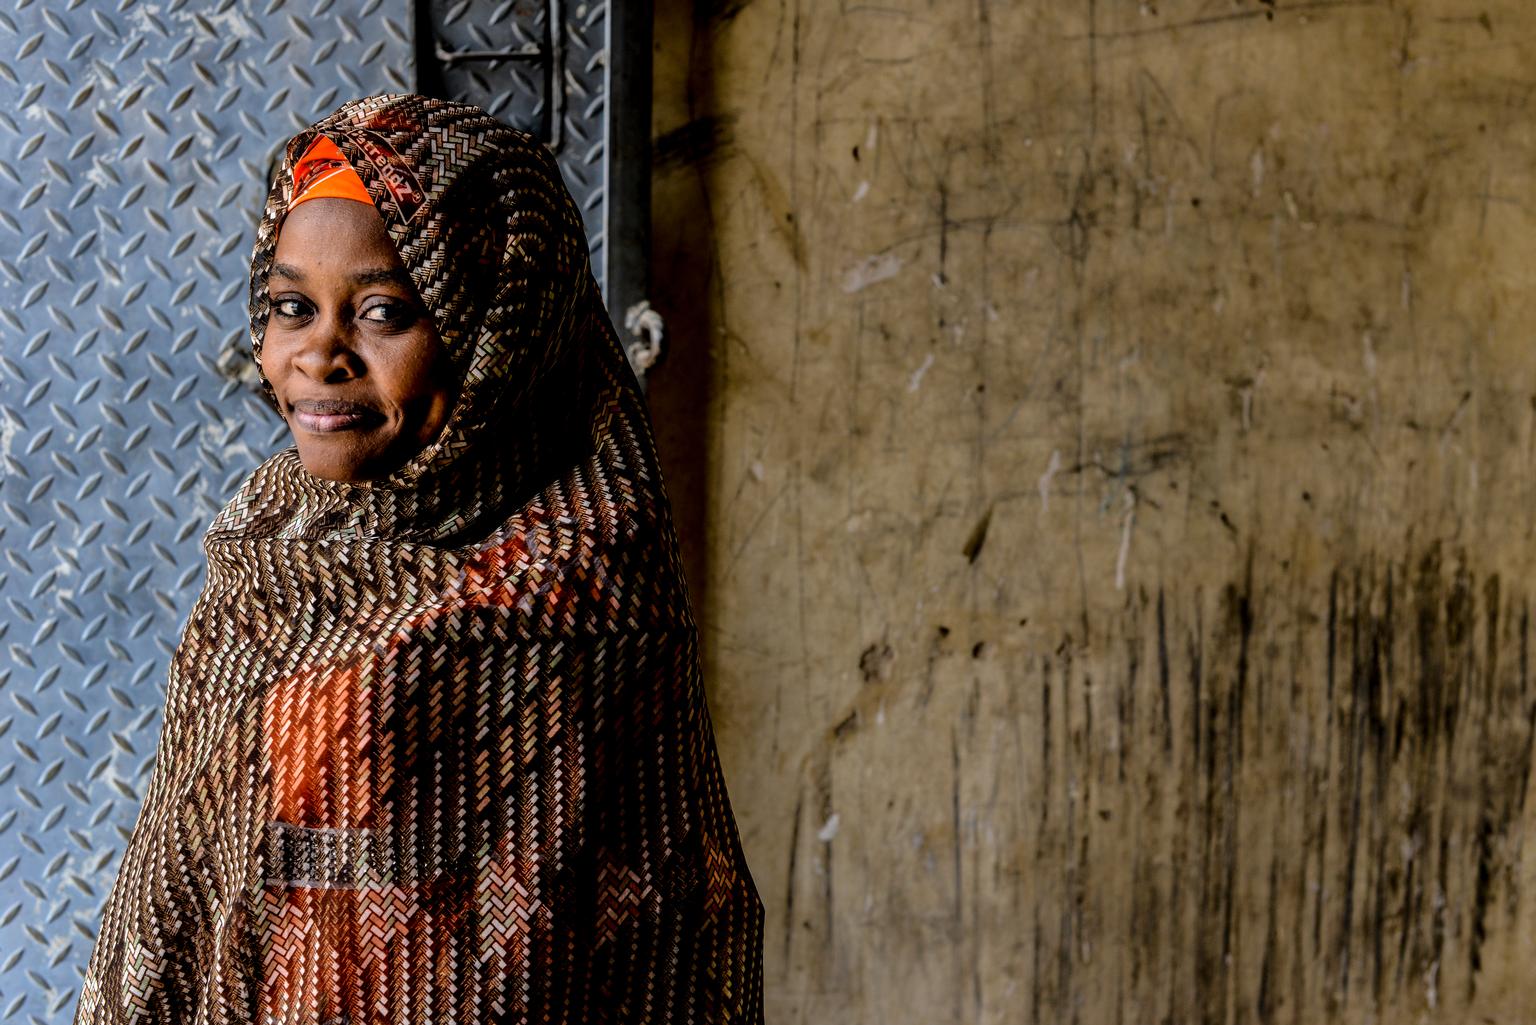 Polio survivors like Amina Abdullhidiso who help convince families to vaccinate their children have helped raise Nigeria's immunization rates. © UNICEF/NYHQ2015-0681/Rich